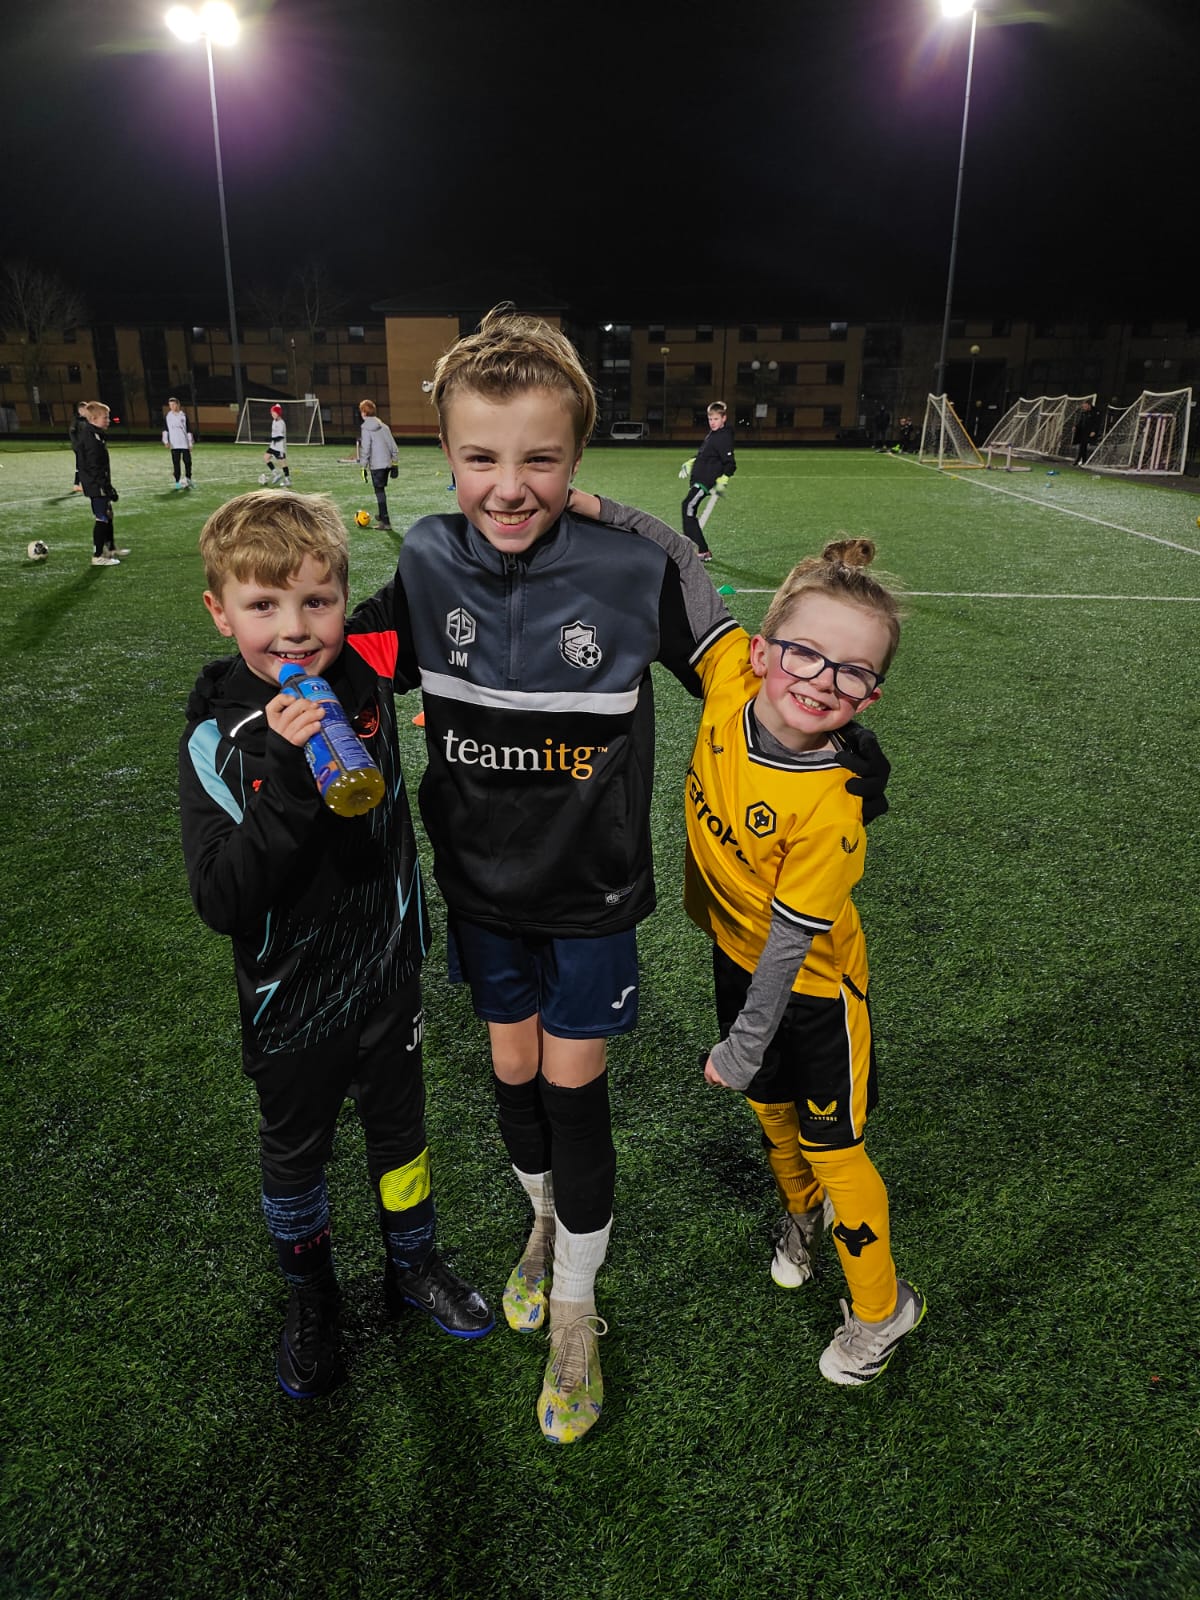 Three young boys stand smiling together on a football pitch